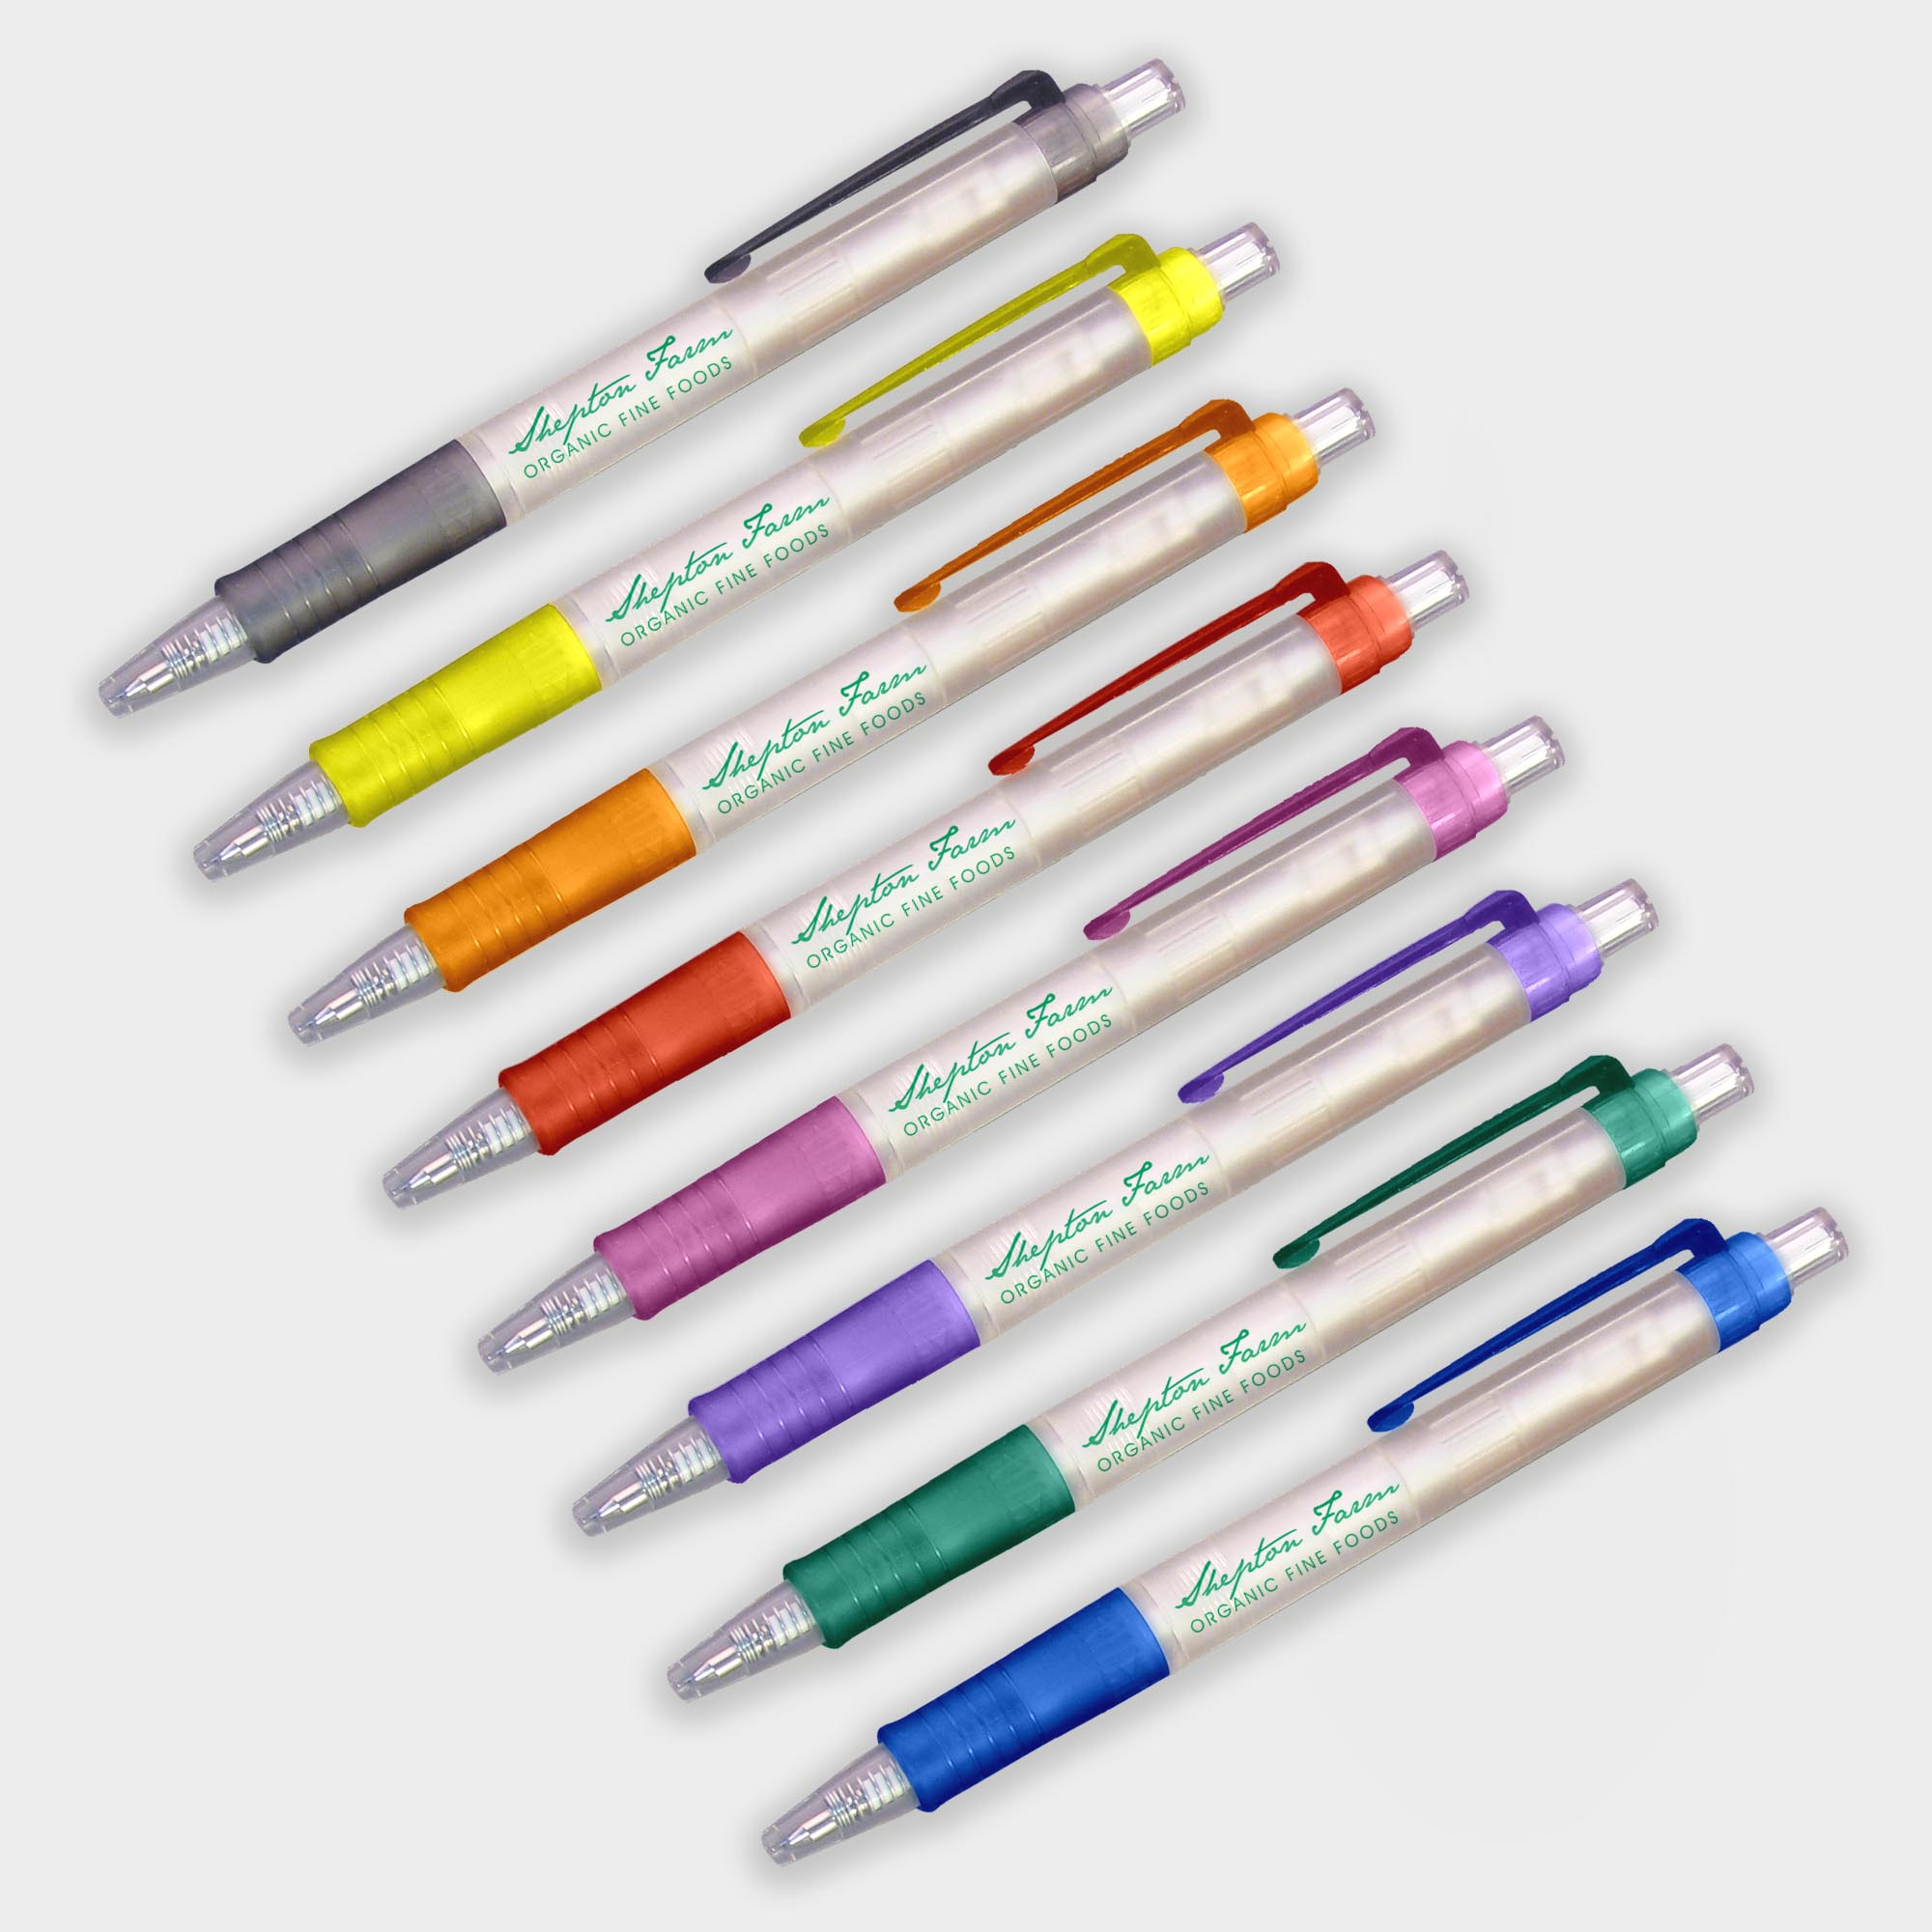 The Green & Good Bio Frost Biodegradable Pen. Corn based plastic pen with a frosted body and a push button. Available in a wide range of trim colours. Black ink as standard.